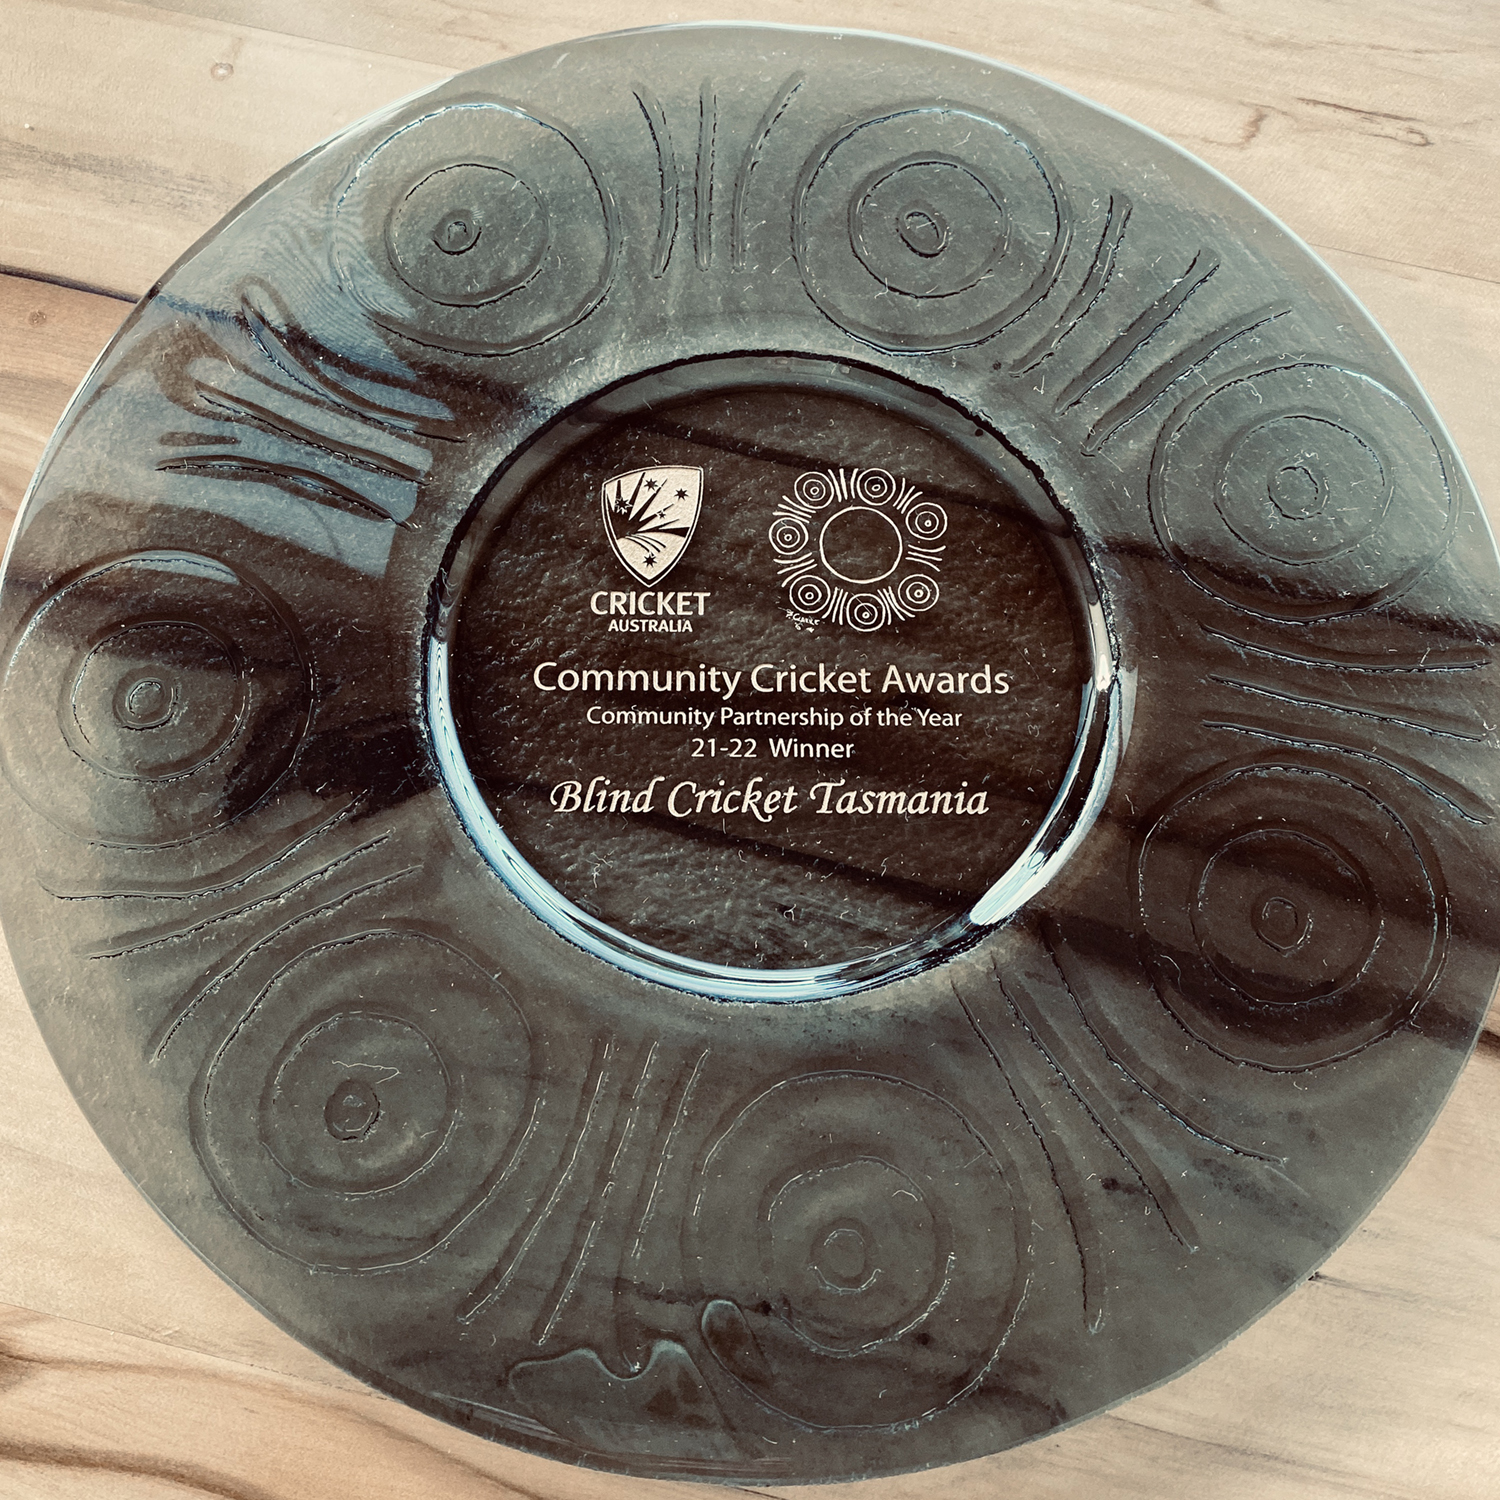 A glass trophy plate given to BCT for winning Cricket Australia's National Community Partnership of the Year Award in 2022